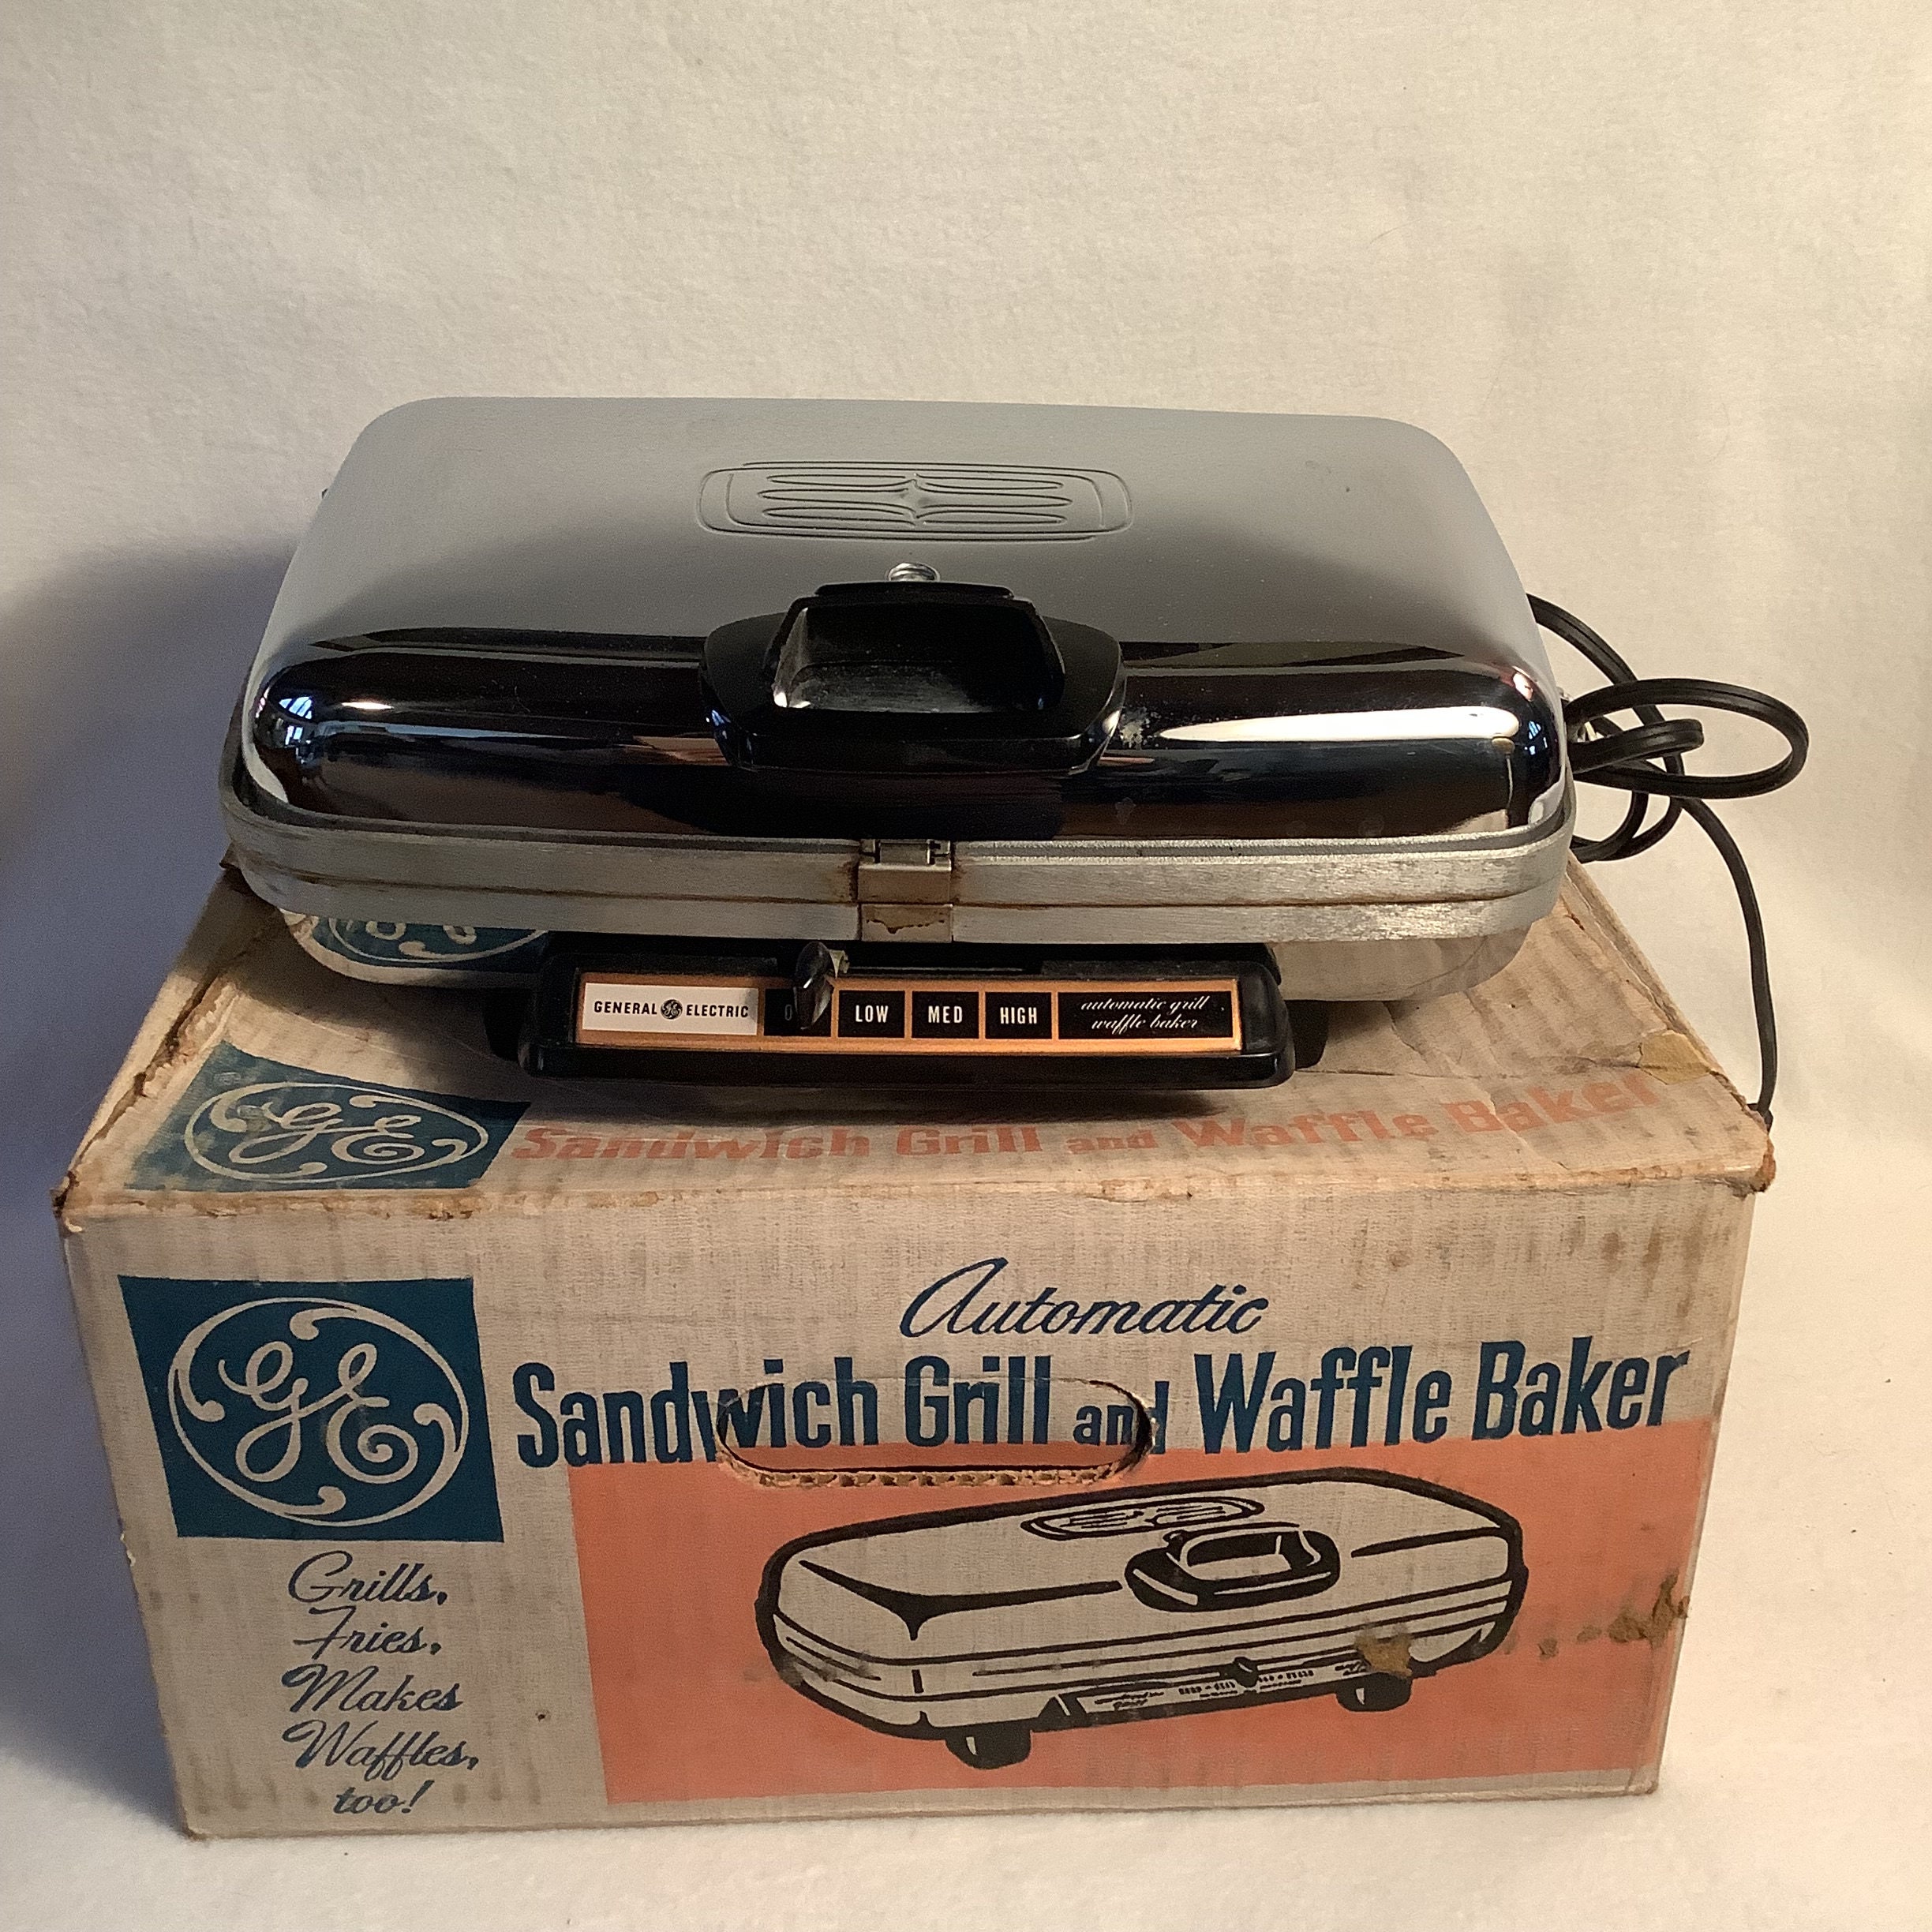 Buy a 3-in-1 Grill - Griddle - Waffle Machine Maker, G48TD